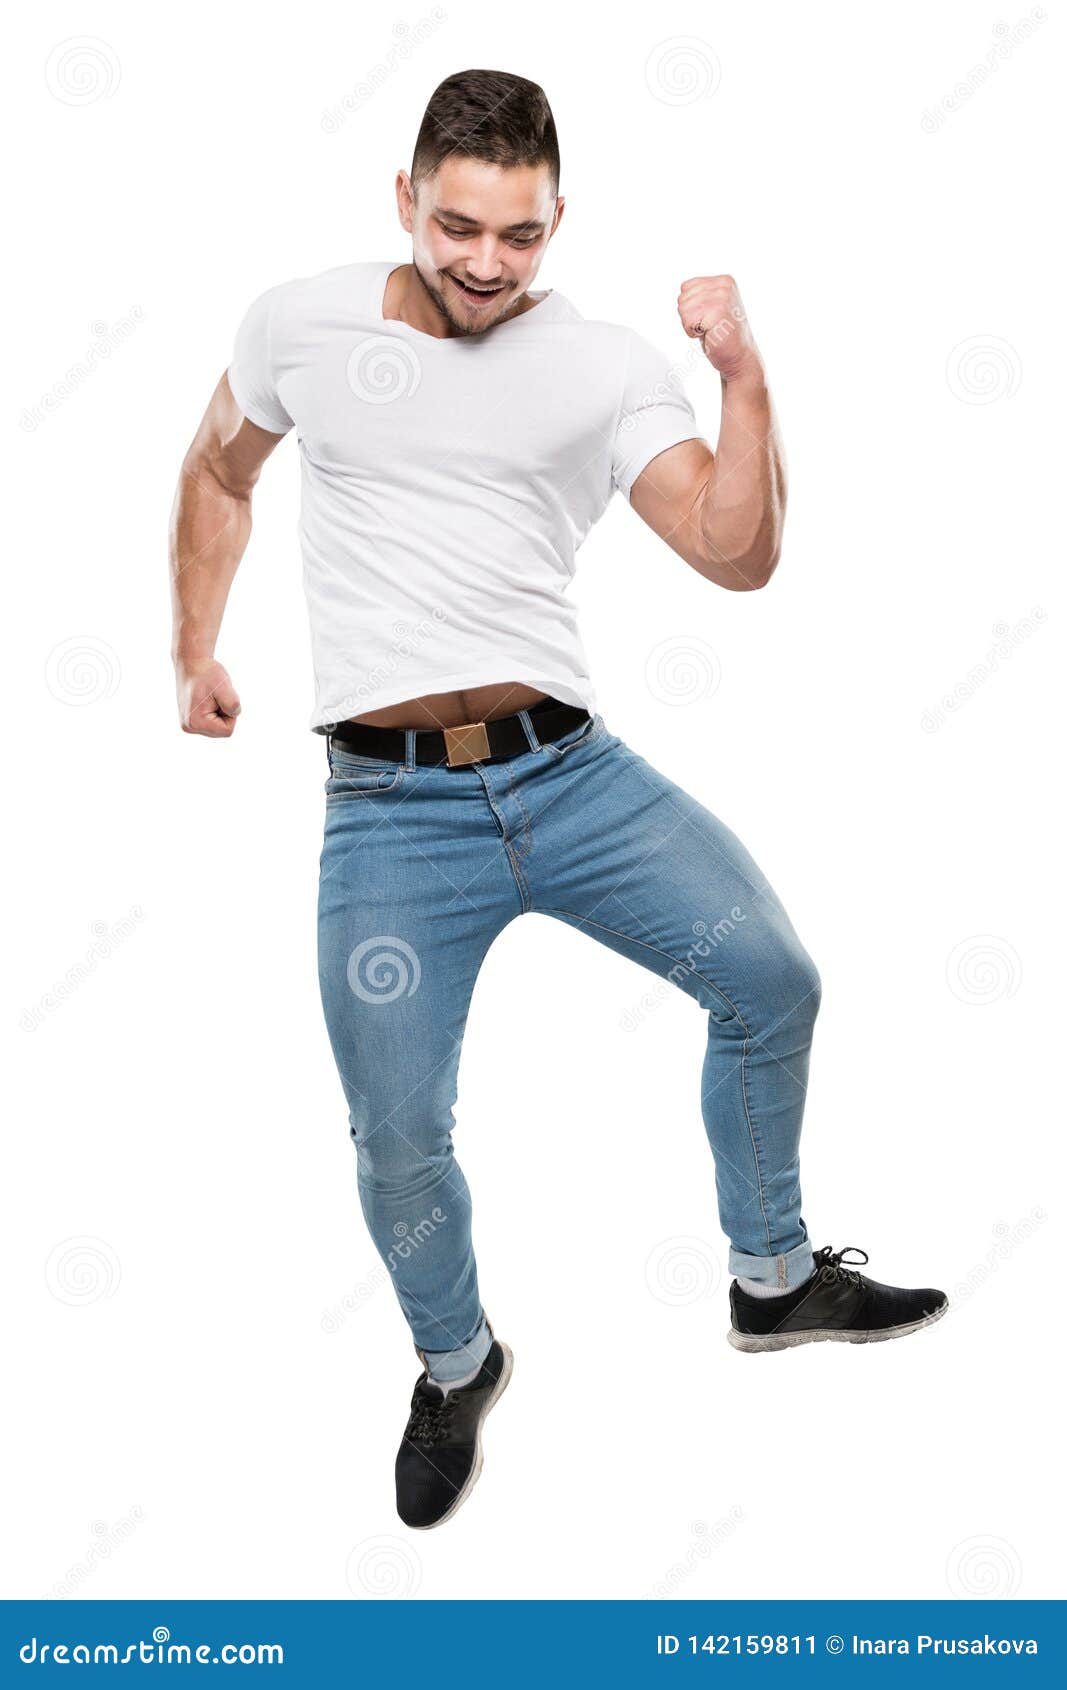 Jumping Man Full Body on White Background, Boy in Jump, Casual T Shirt Jeans  Stock Image - Image of blue, front: 142159811